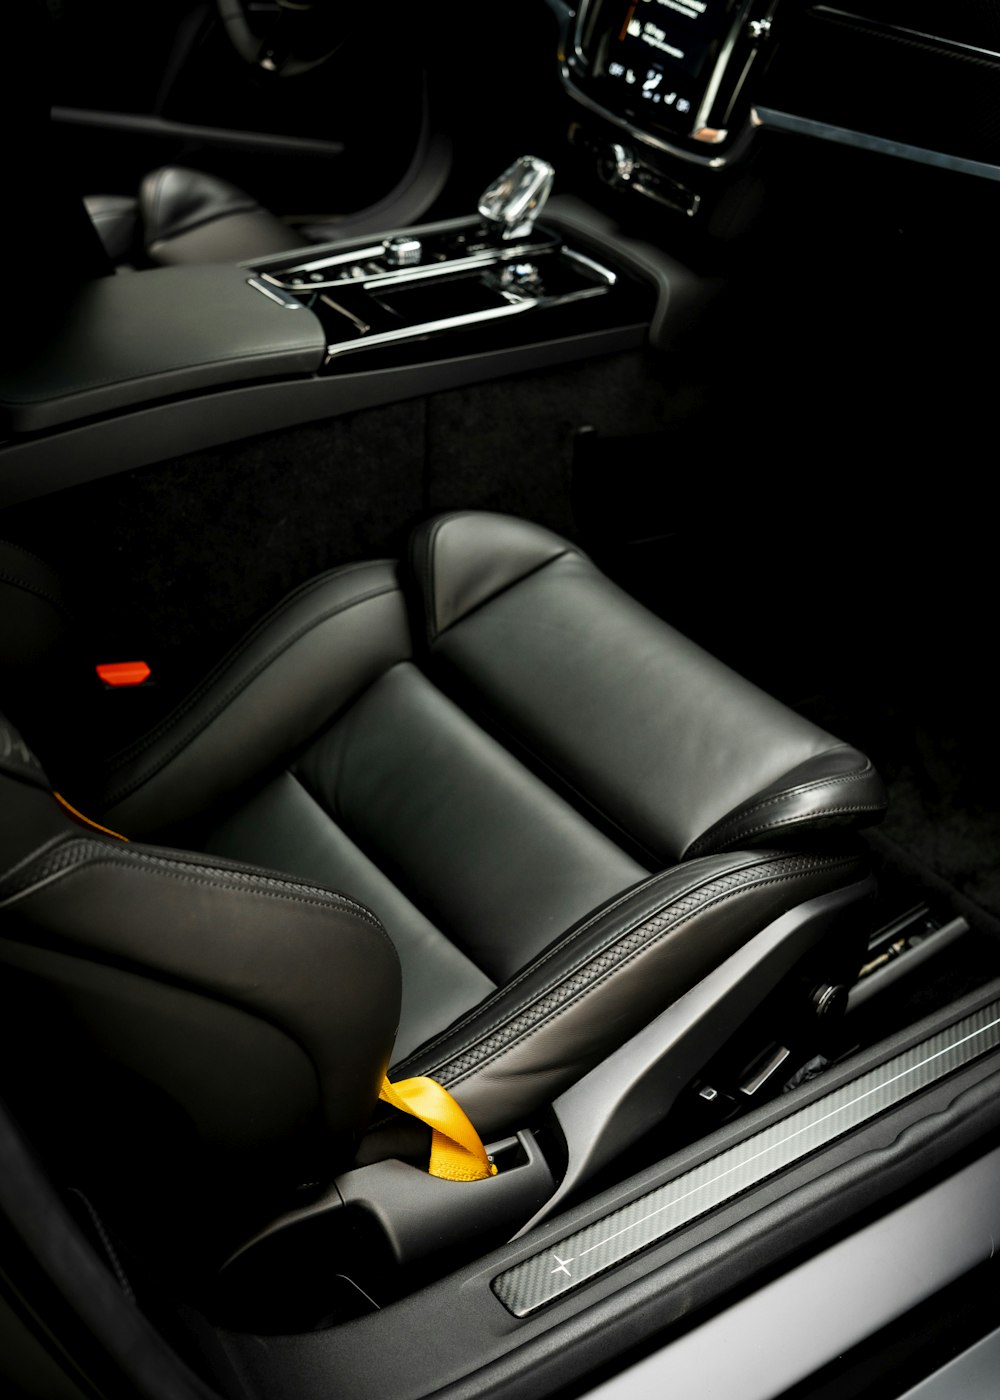 the interior of a car with black leather seats